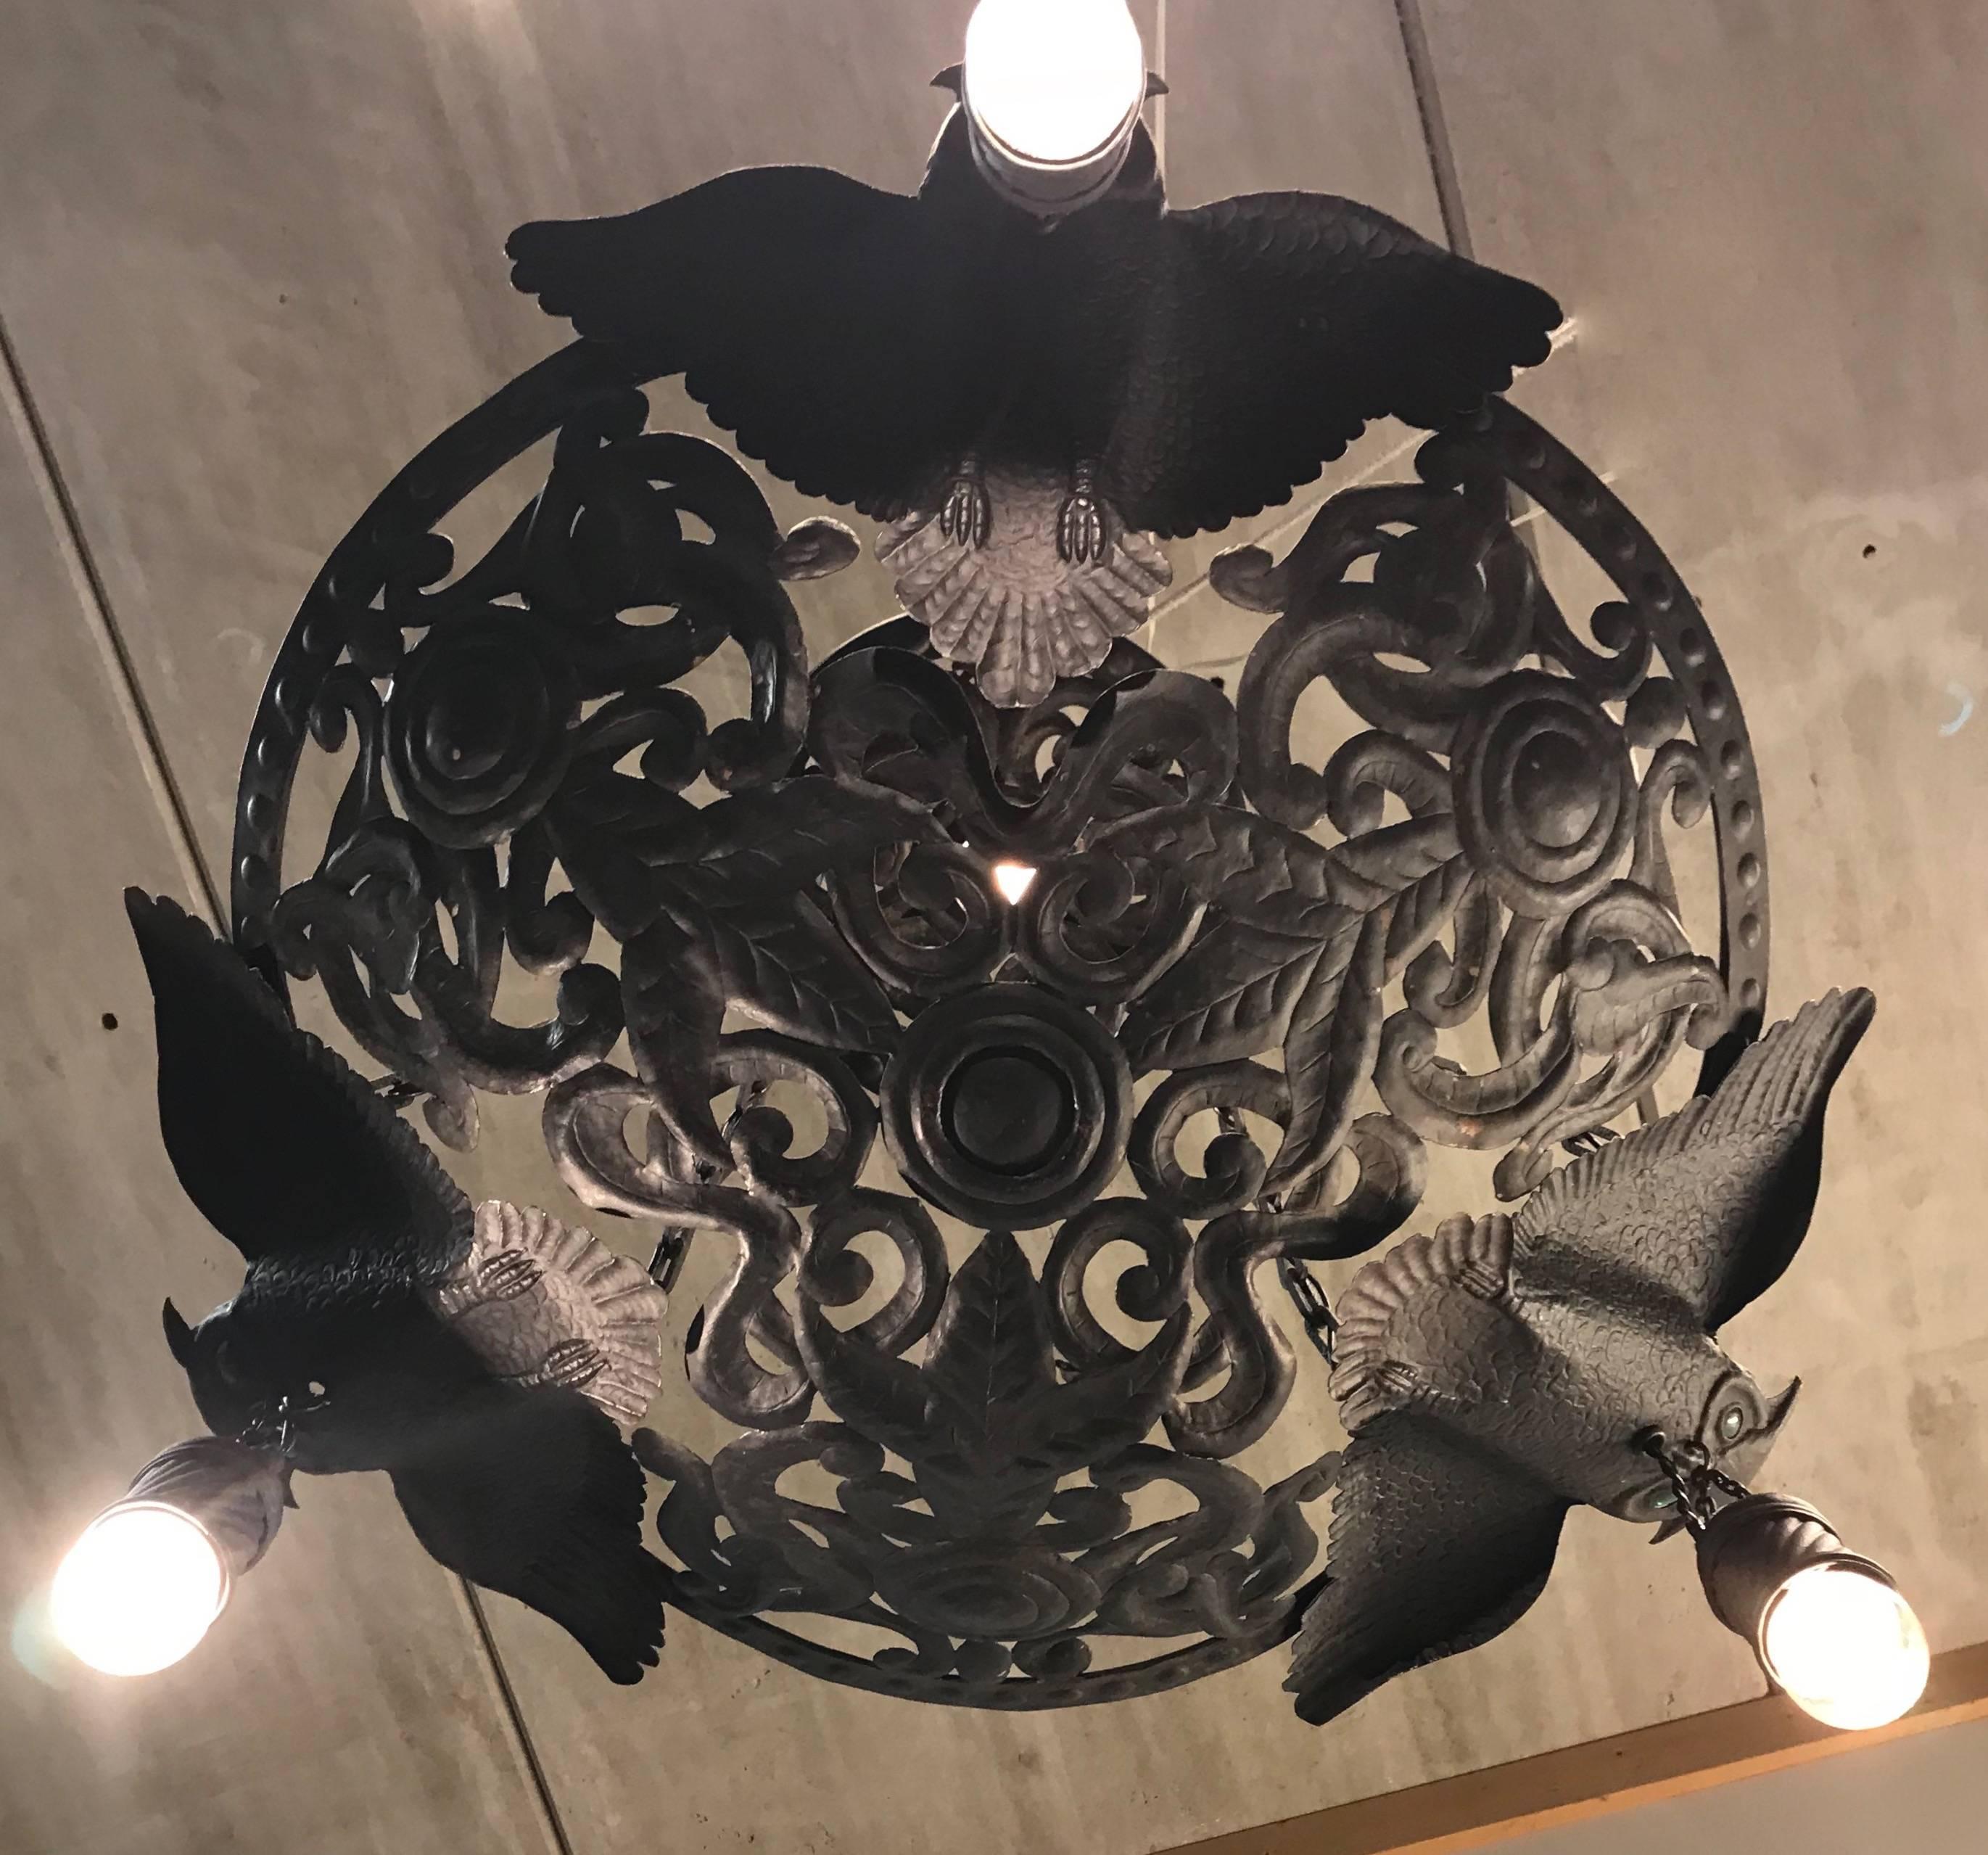 Early 20th century, owls with glass eyes chandelier. 

If you are a collector of unique and stylish, Arts & Crafts antiques then this amazing and all handcrafted light fixture could be perfect for you. The broad winged owls in this pendant, look